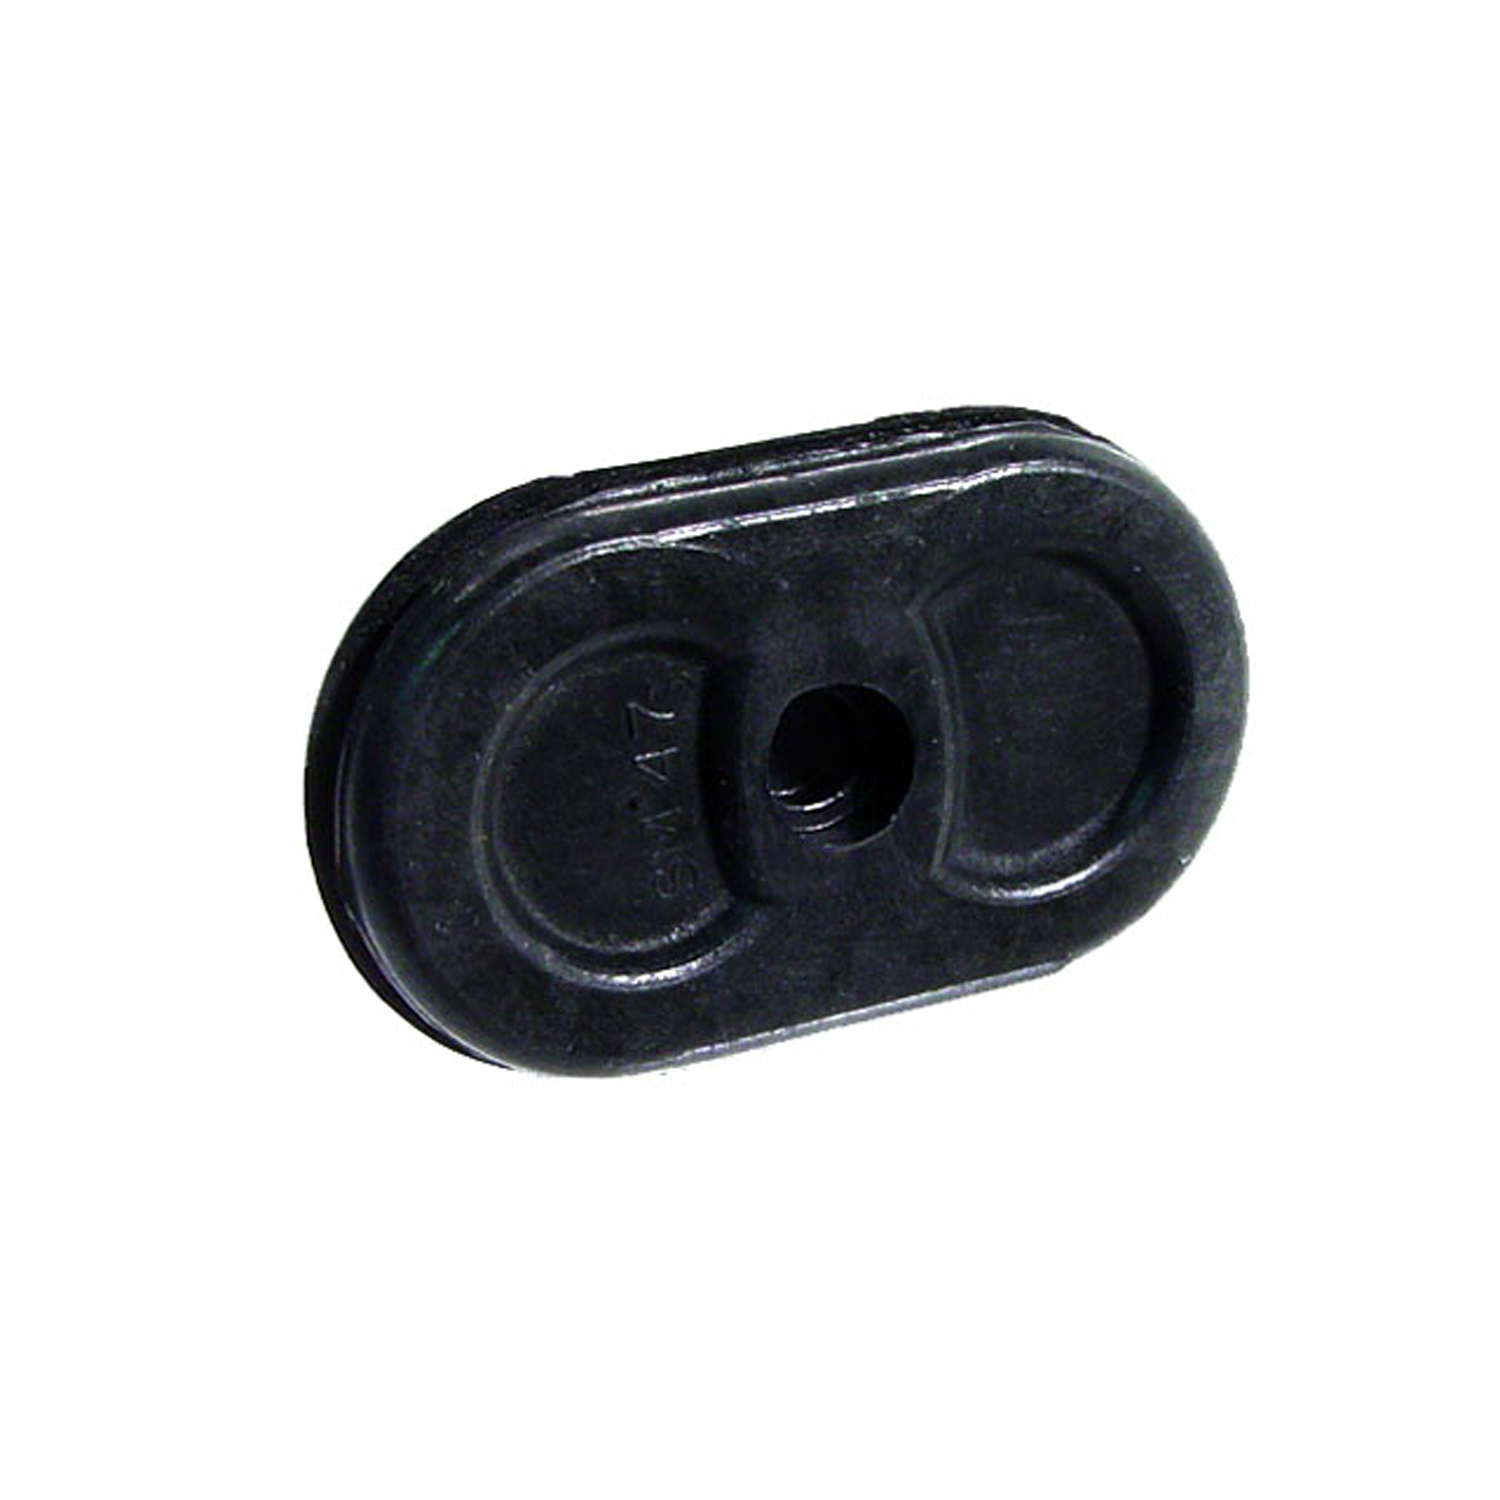 1940 Buick Roadmaster Series 80 Speedometer Cable Firewall Grommet.  Fits 1-7/8 long hole-SM 47